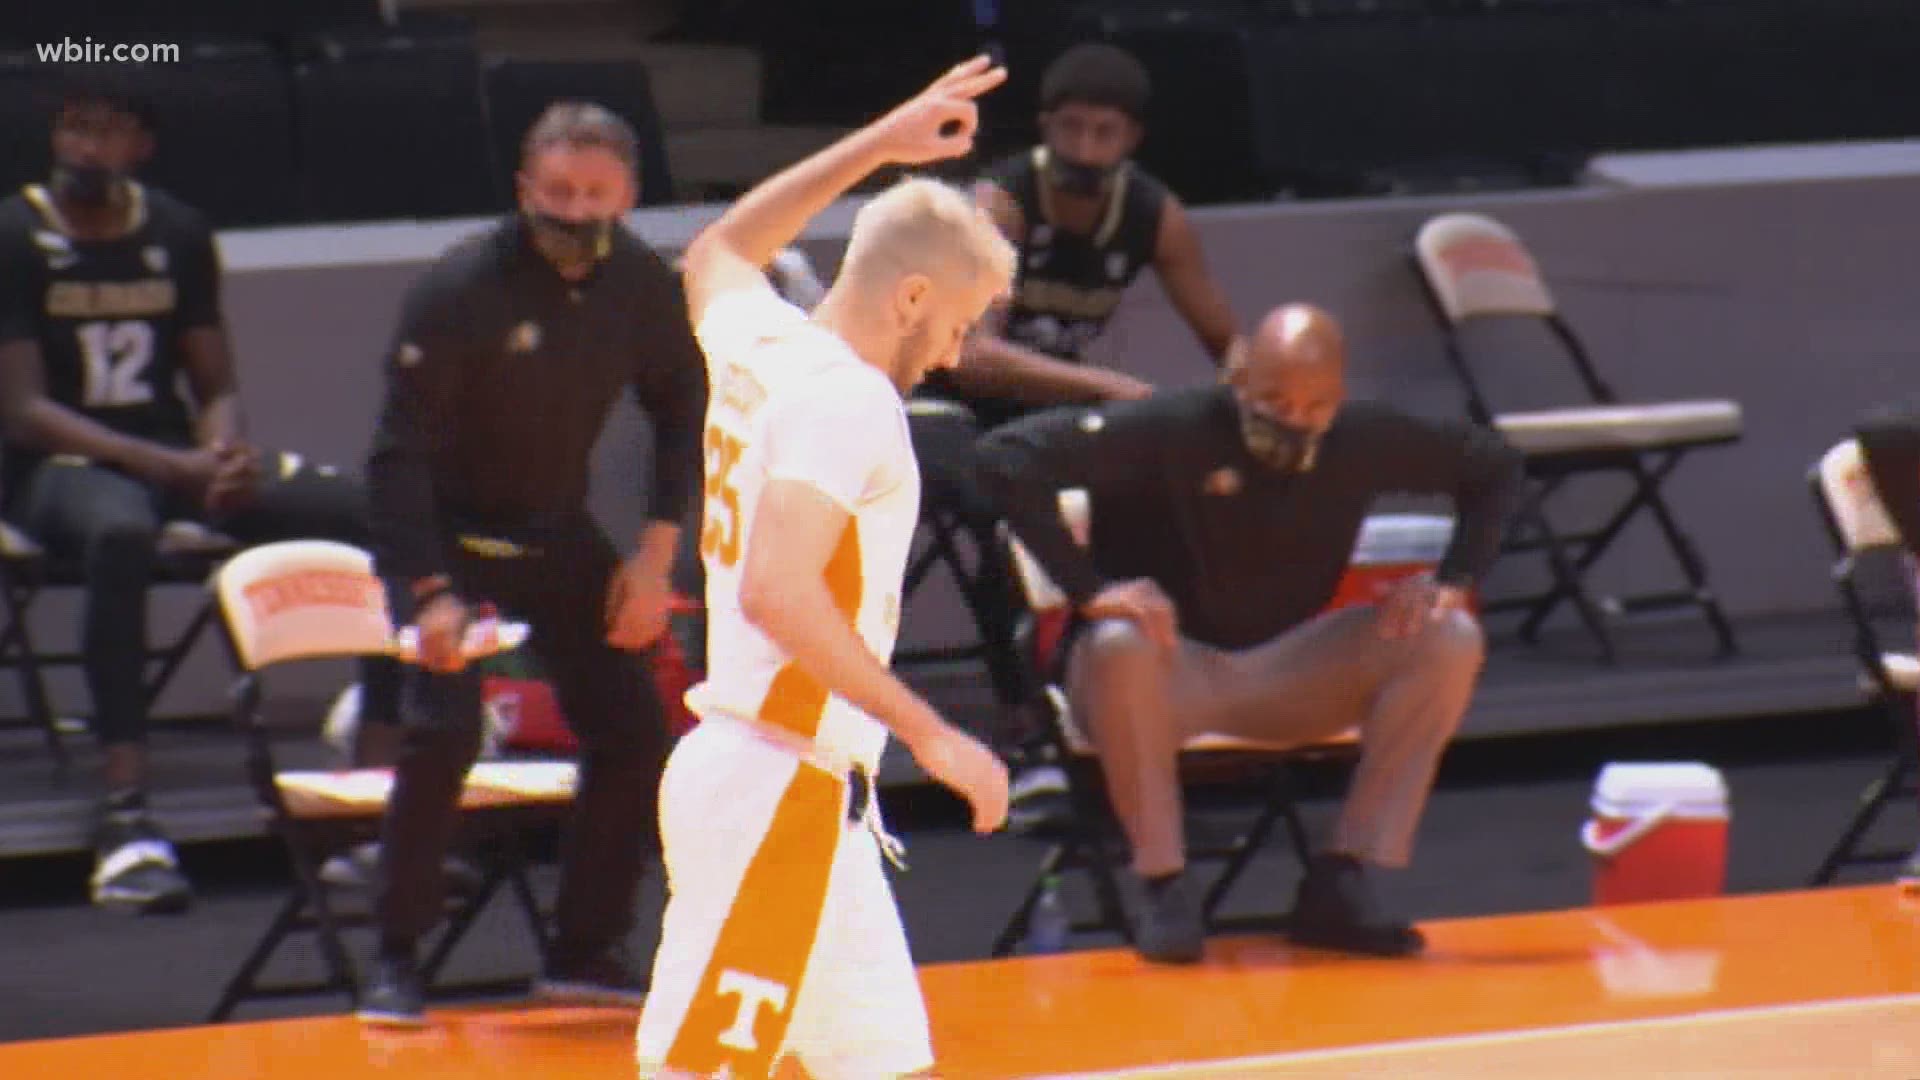 The Vols are 7-0 and ranked in the top 10 of AP poll. Assistant head coach Kim English says there's no telling if Tennessee is the team to beat in the SEC yet.